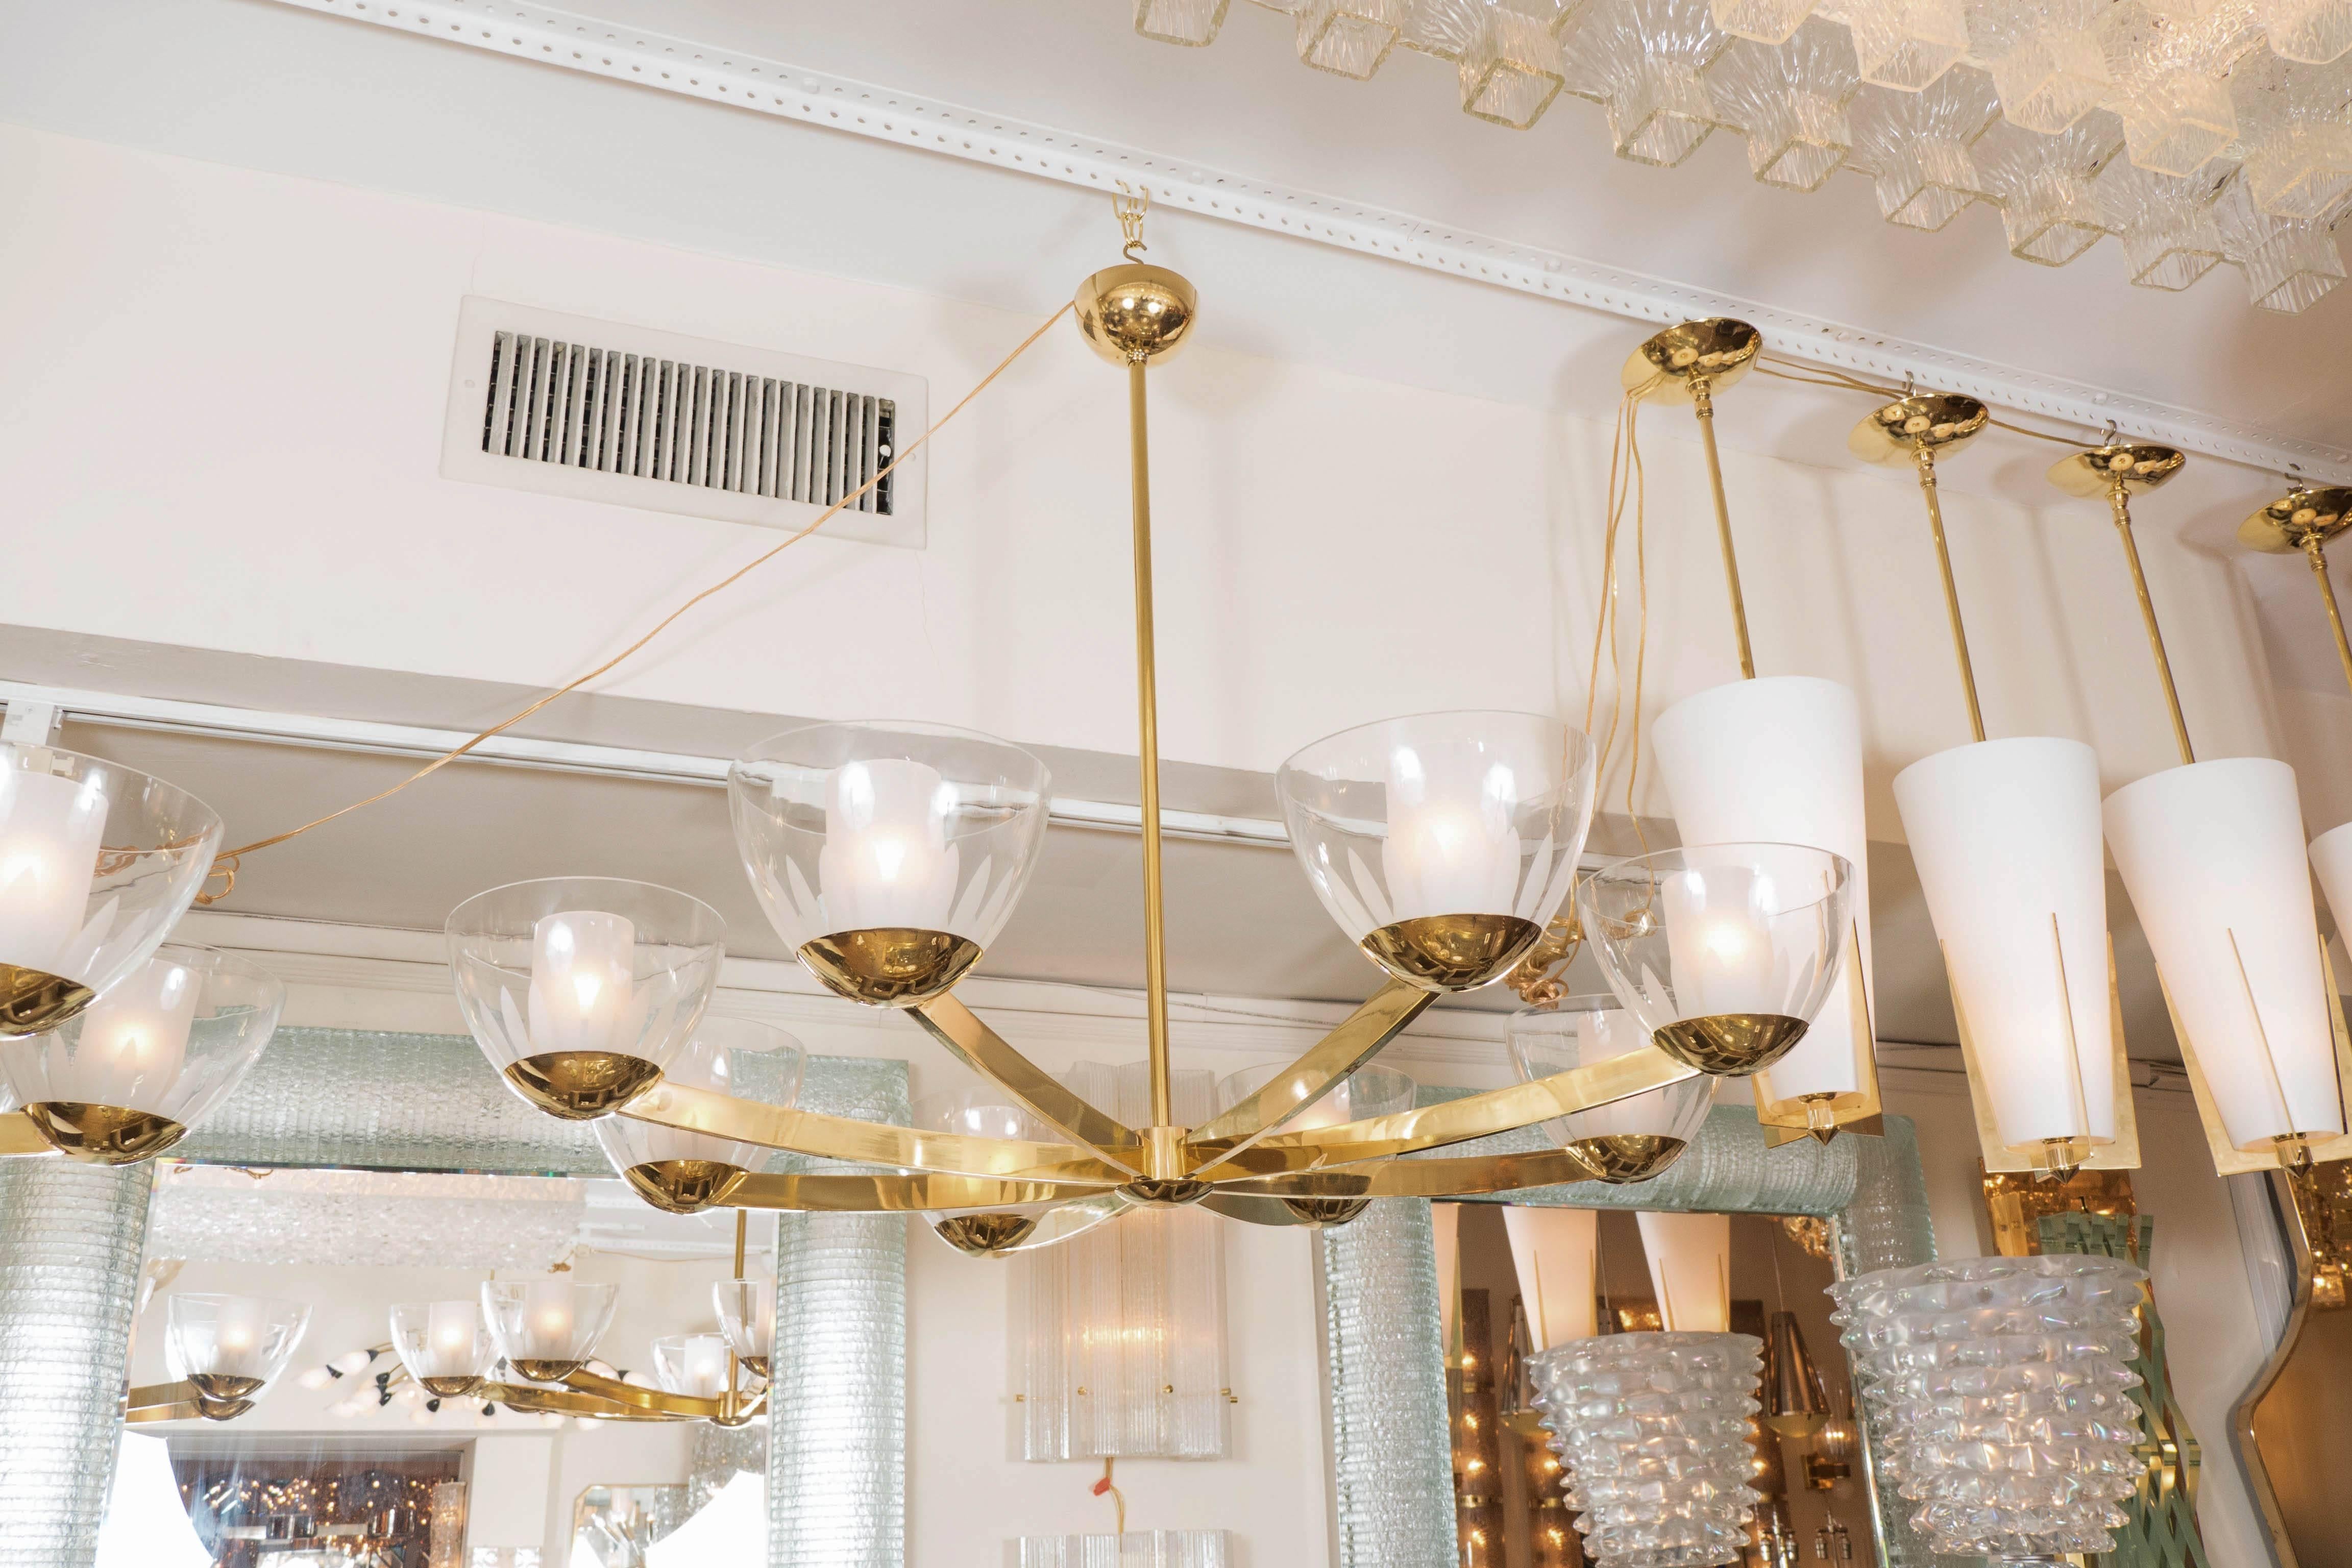 Eight-arm brass chandelier featuring clear glass bobeches with frosted floral design.